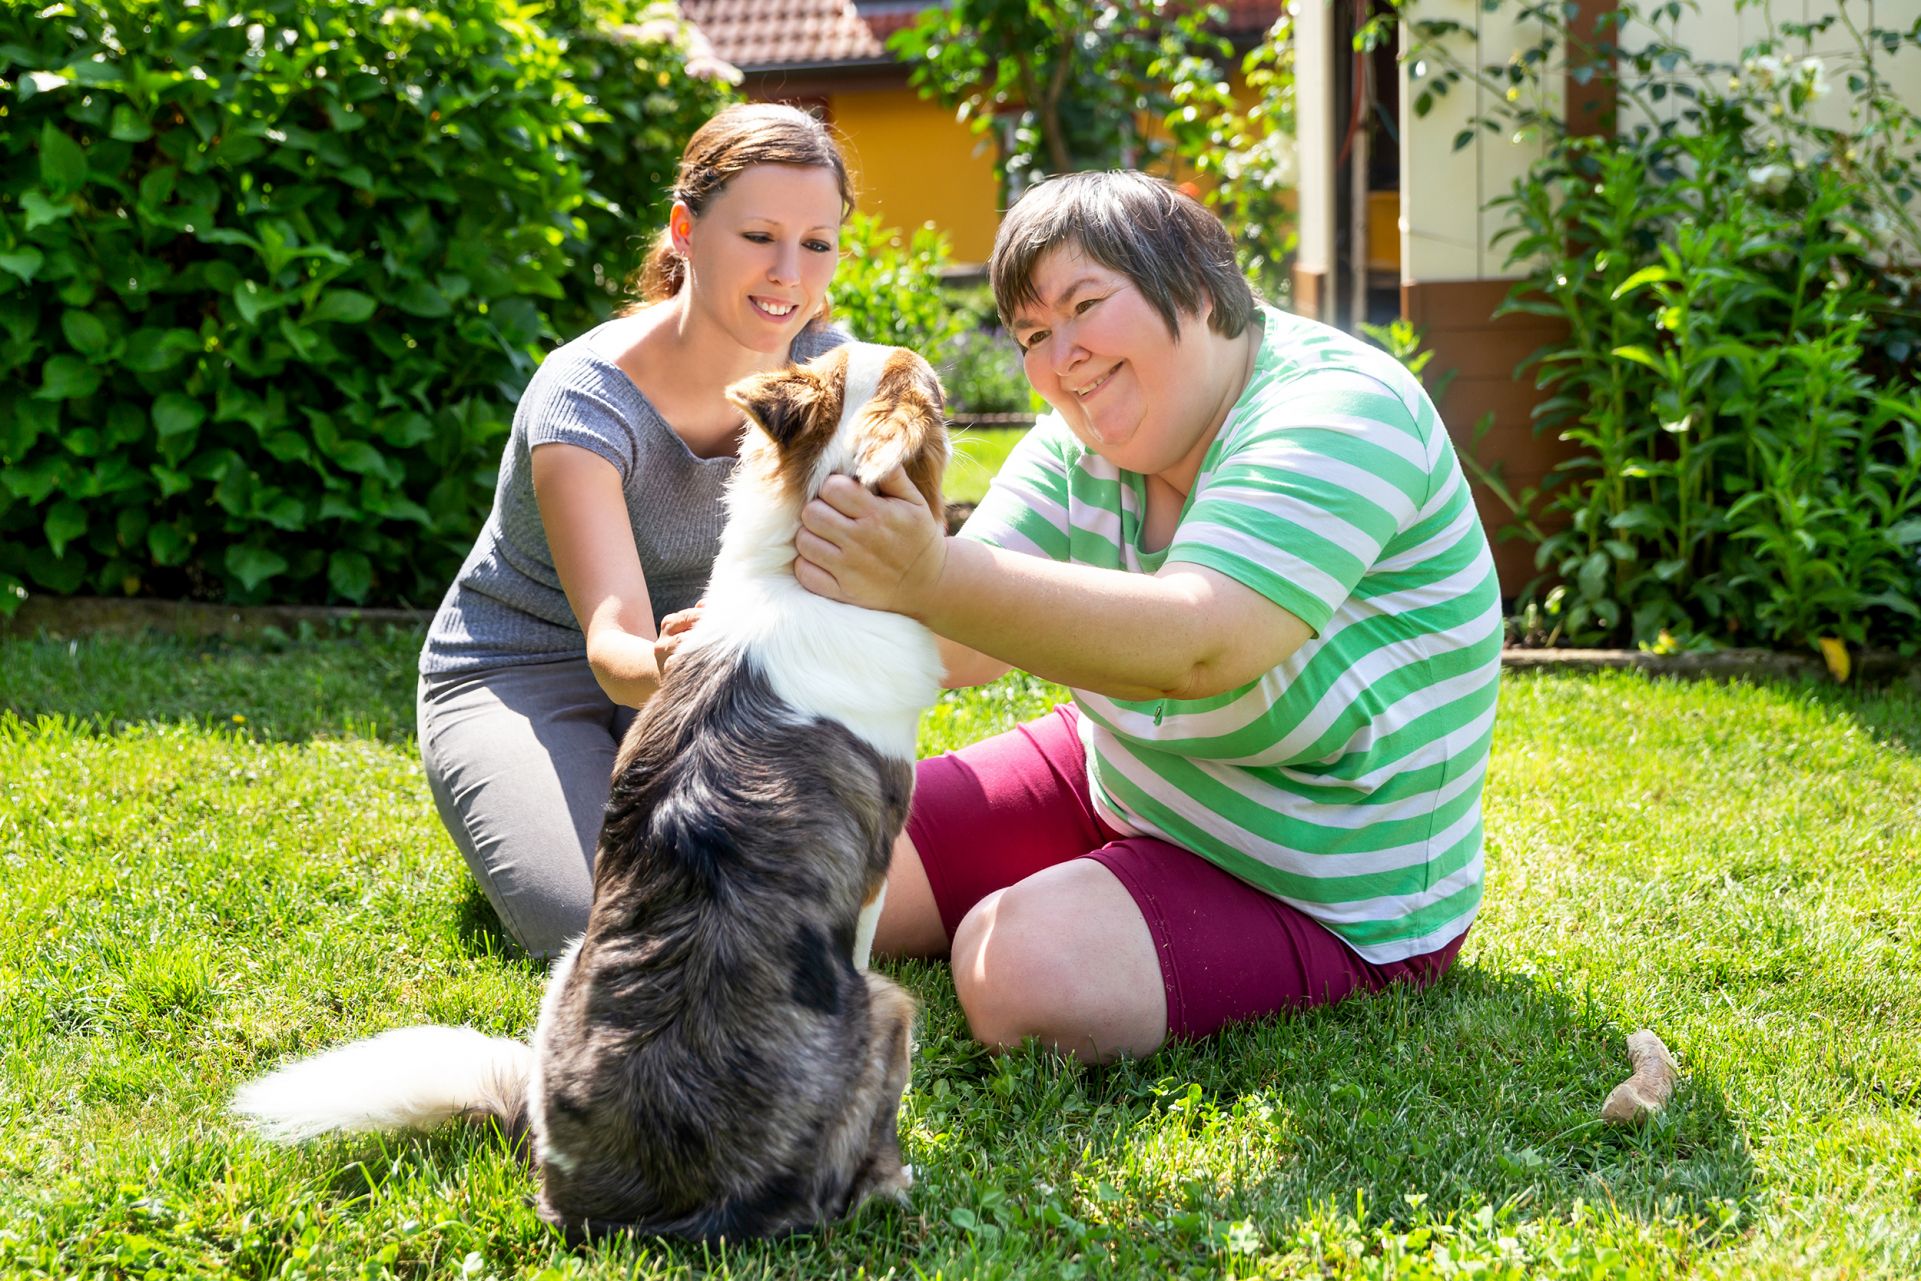 idd support person working with woman with developmental disabilities and petting a dog